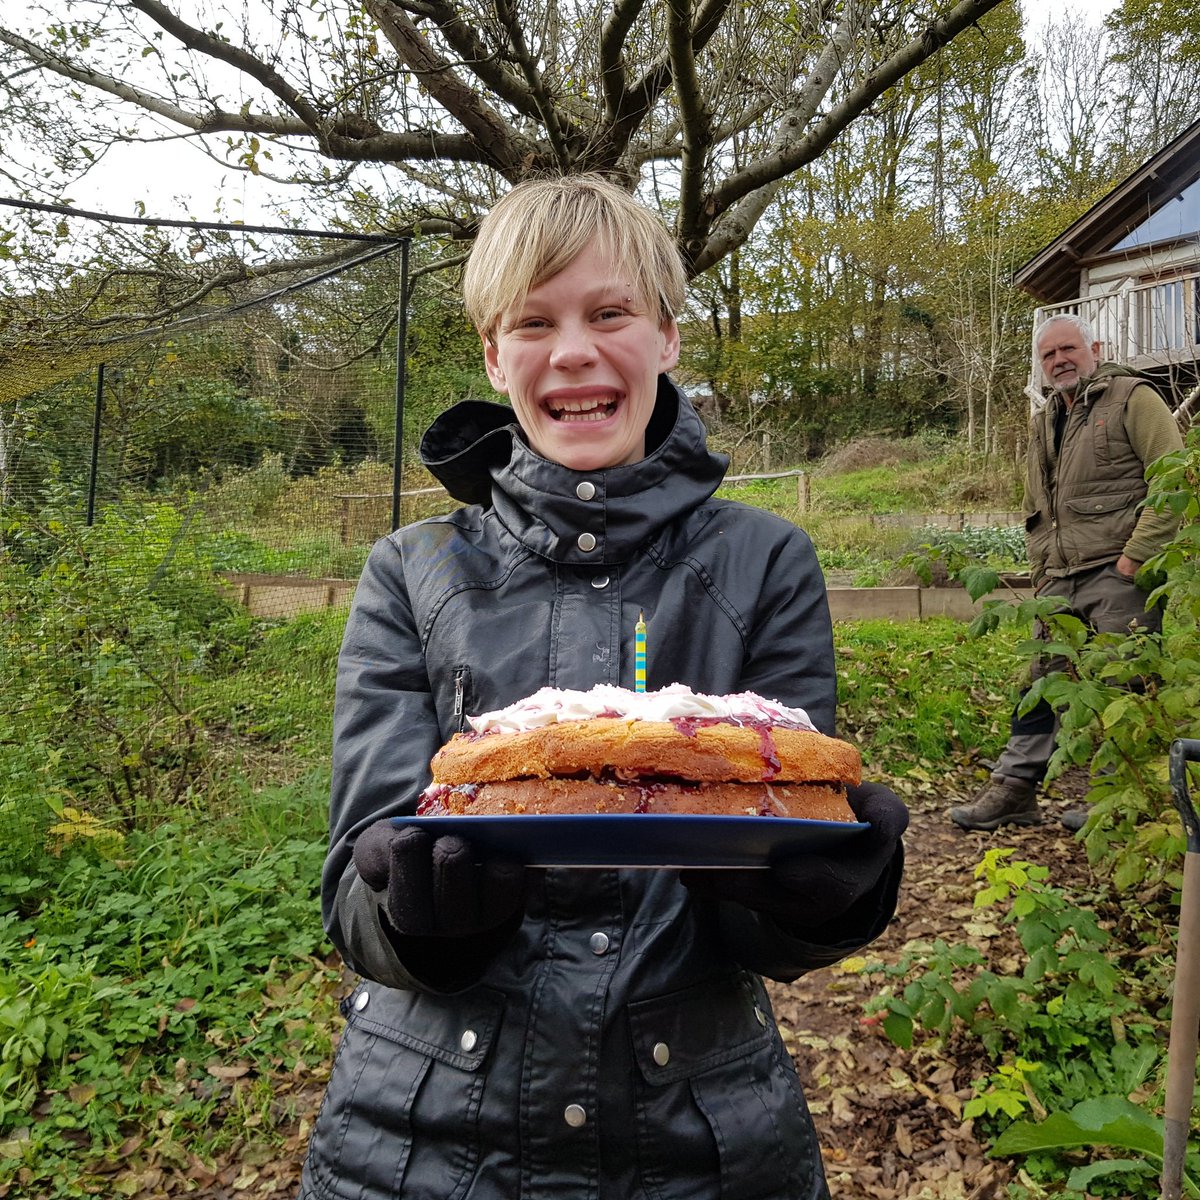 As it was Molly's birthday she got to make her favourite lunch followed by Jo's home made Victoria sponge with forest garden jam  @stjohns_sussex